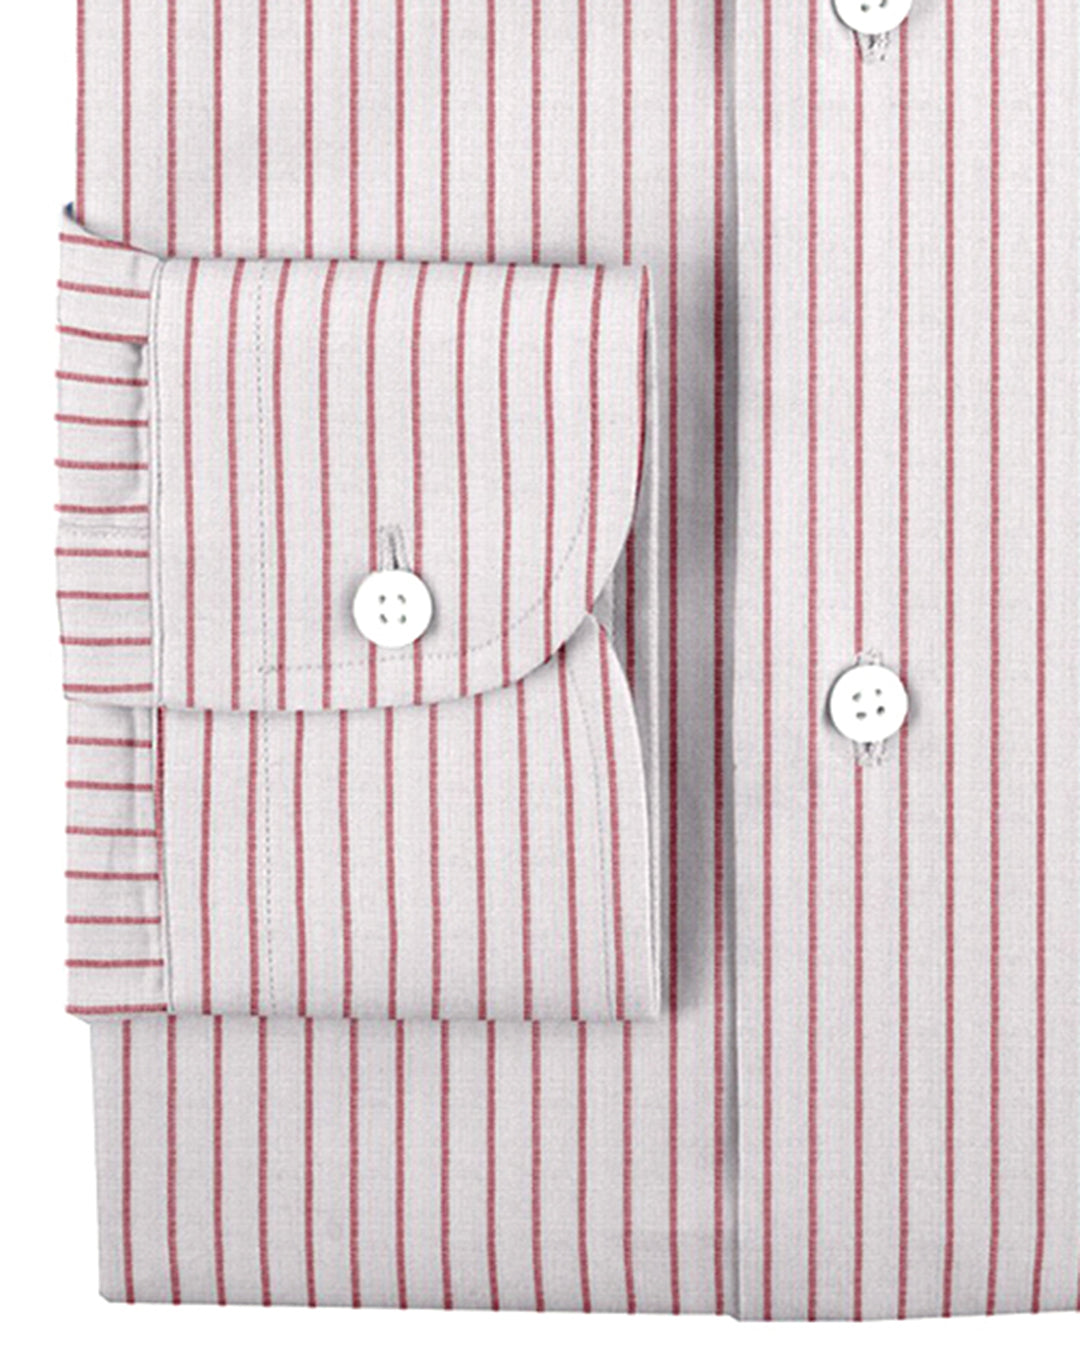 Cuff of the custom linen shirt for men in white and red pinstripes by Luxire Clothing